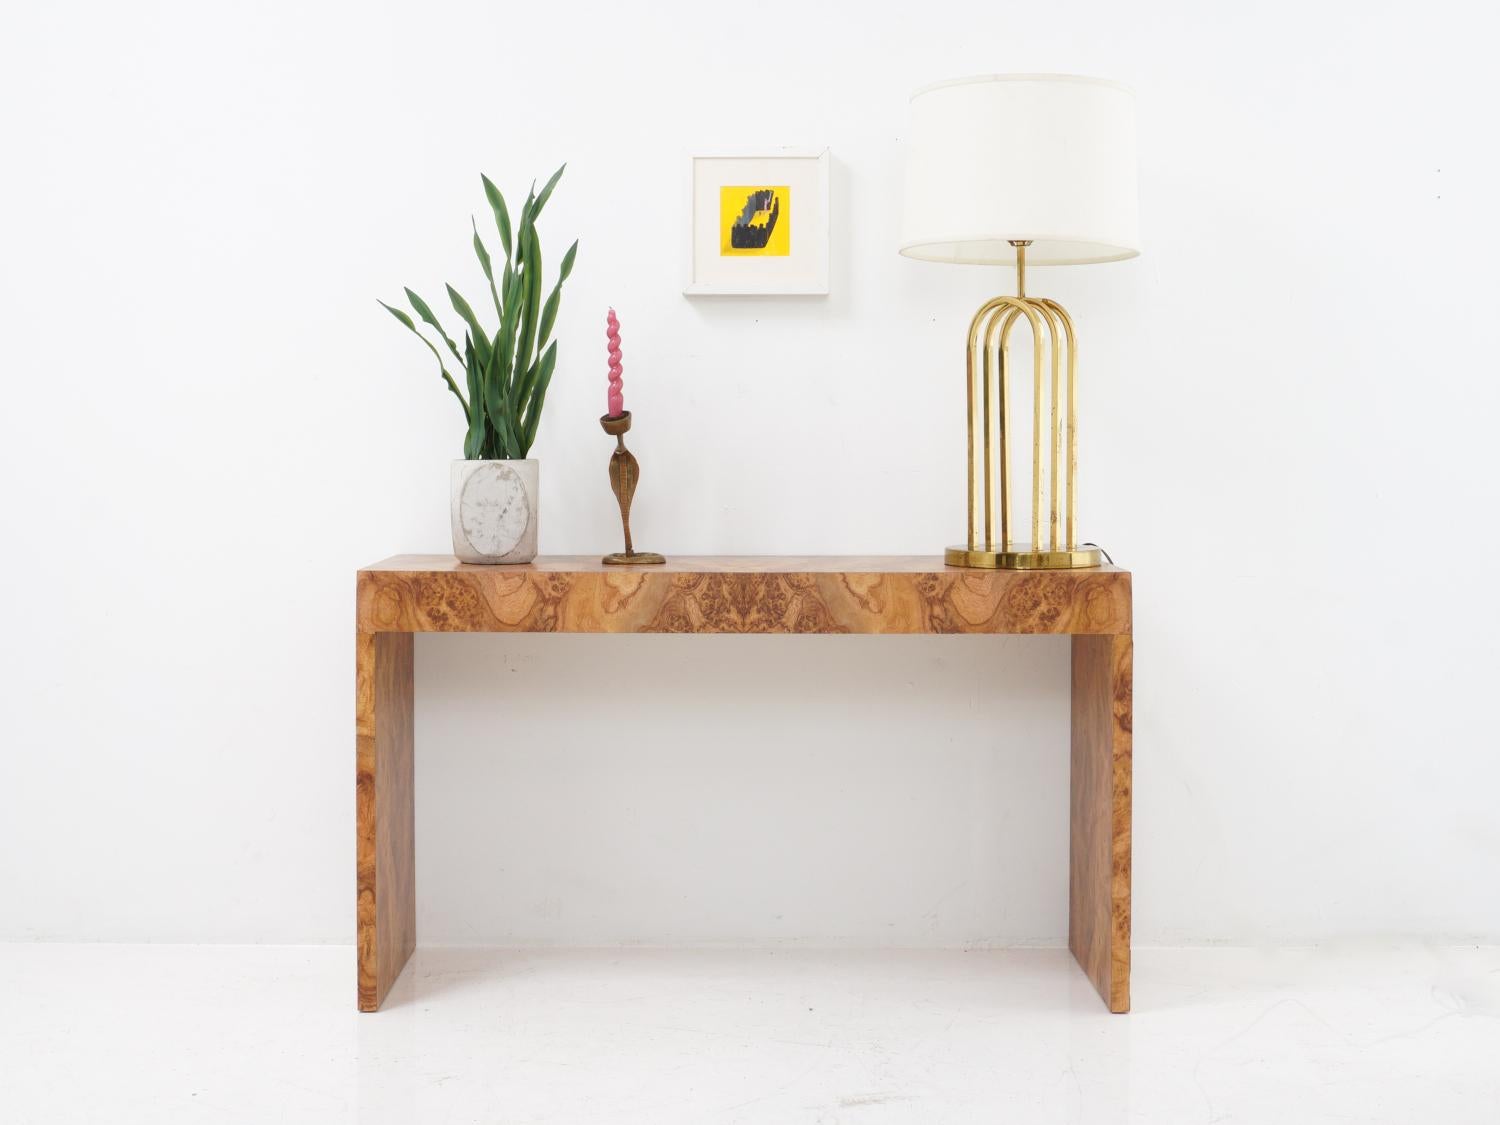 Who says you need real wood to make a statement? This faux burl wood console begs to differ!

- 27.25